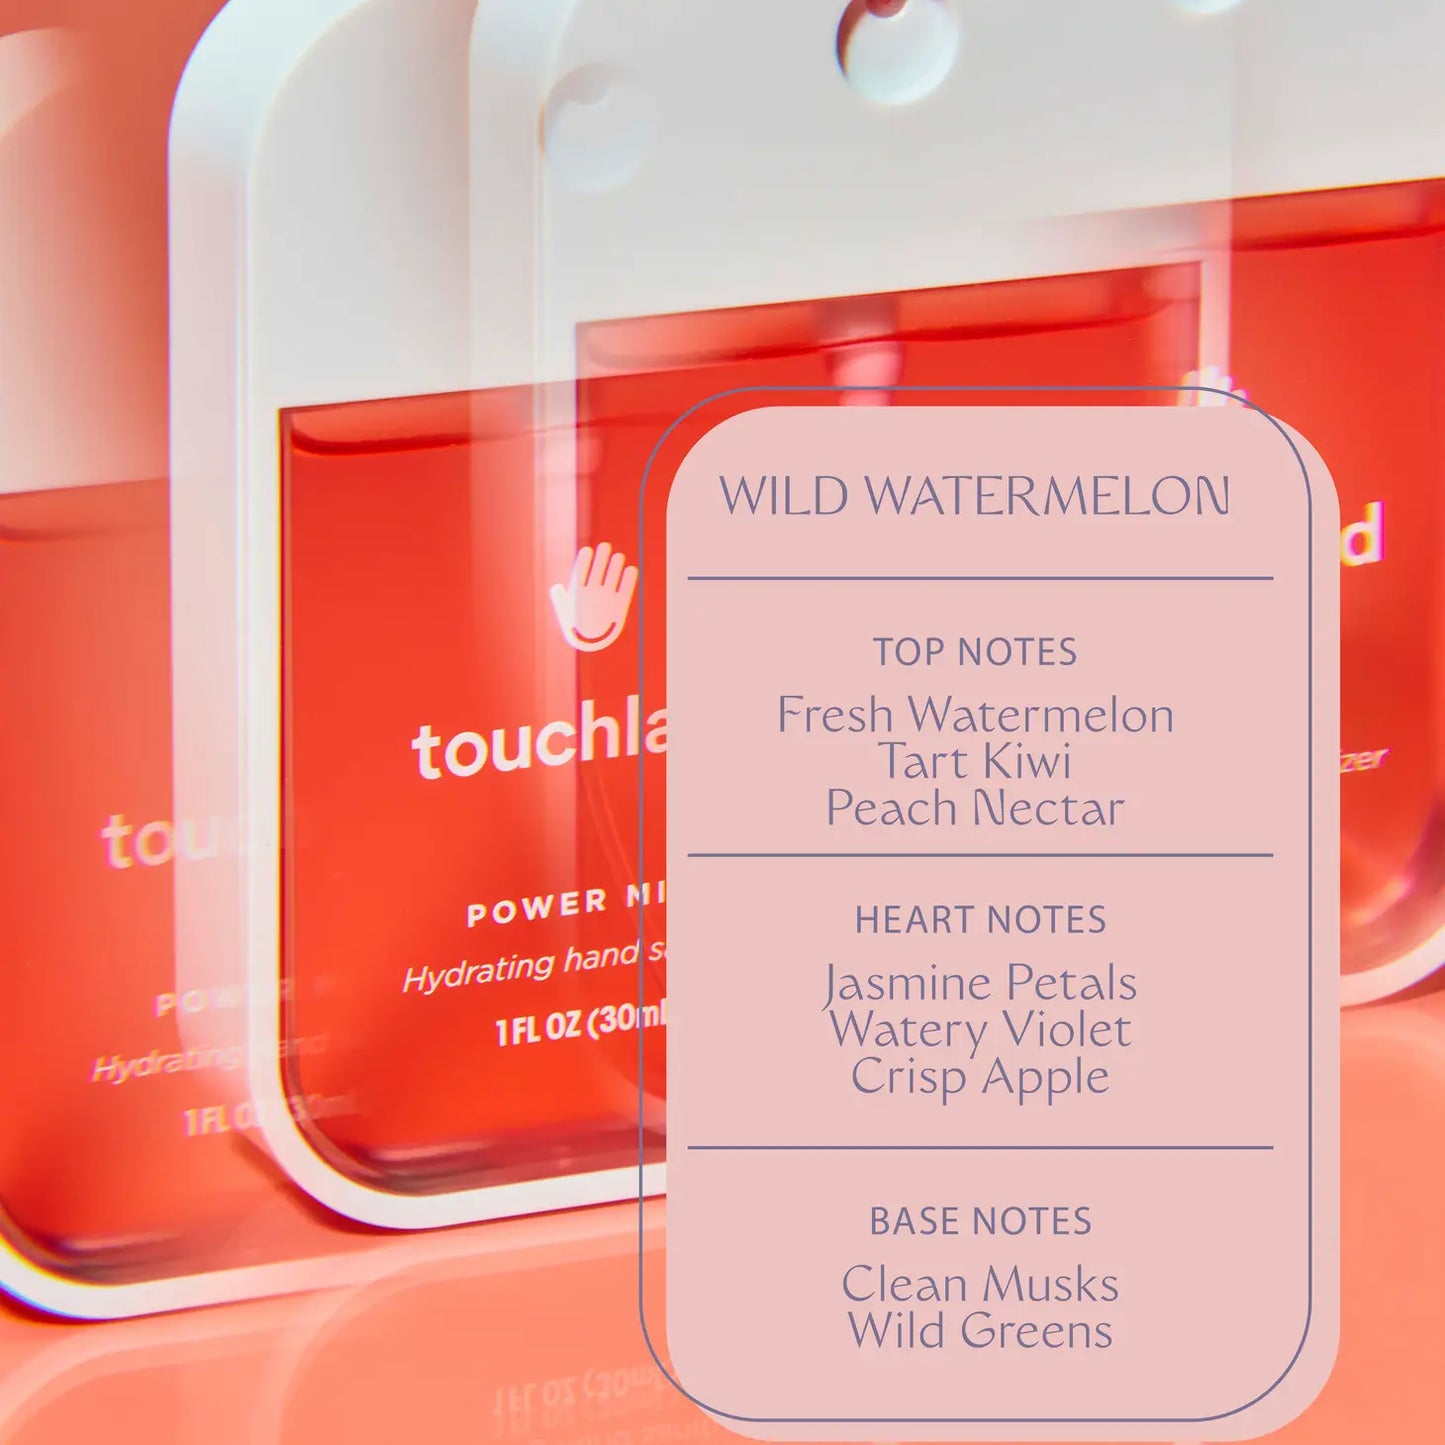 Touchland Hydrating Hand Sanitizer,